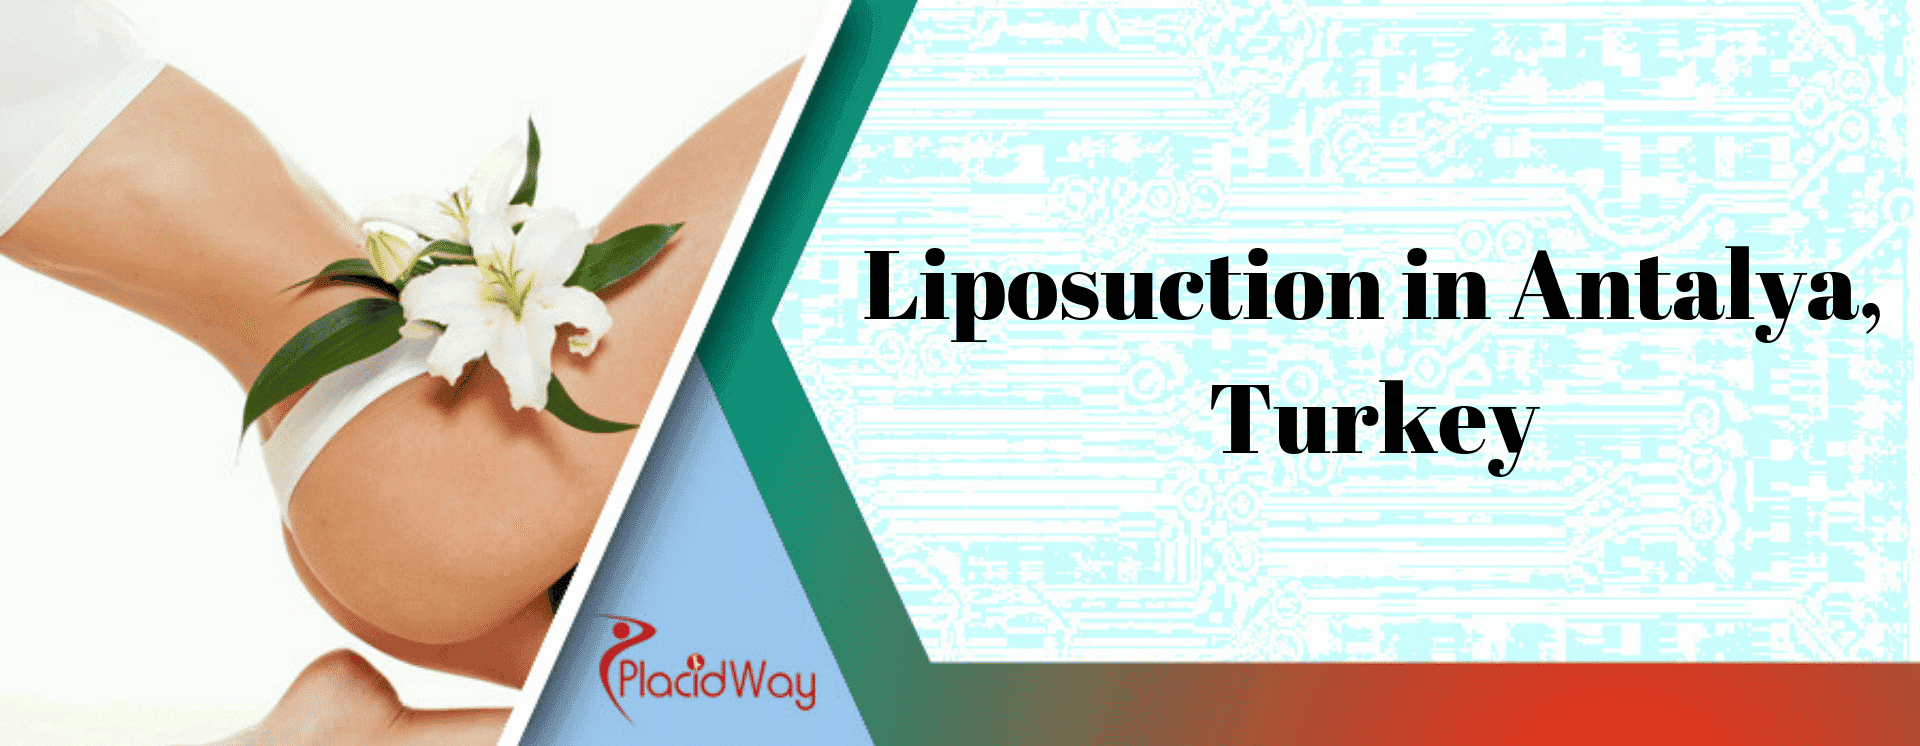 What are the Top 10 Questions You Should Ask a Plastic Surgeon before Going for Liposuction in Antalya, Turkey?